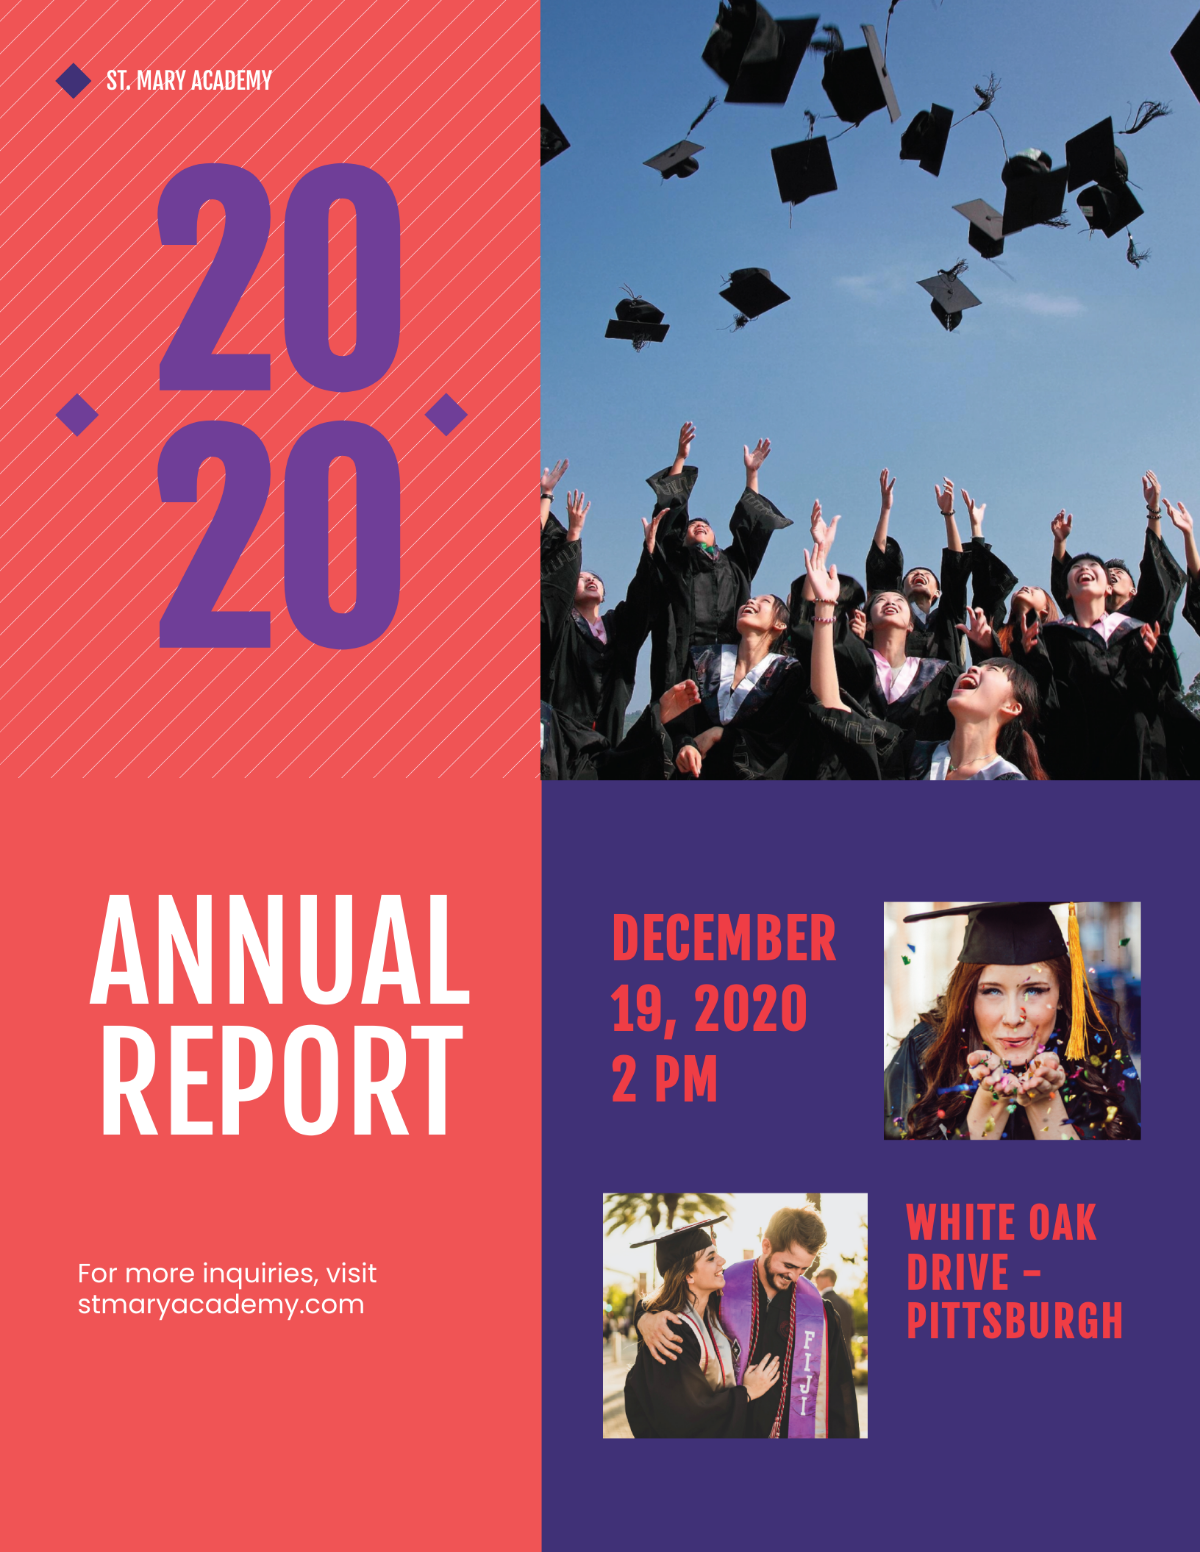 Annual Report Flyer Template